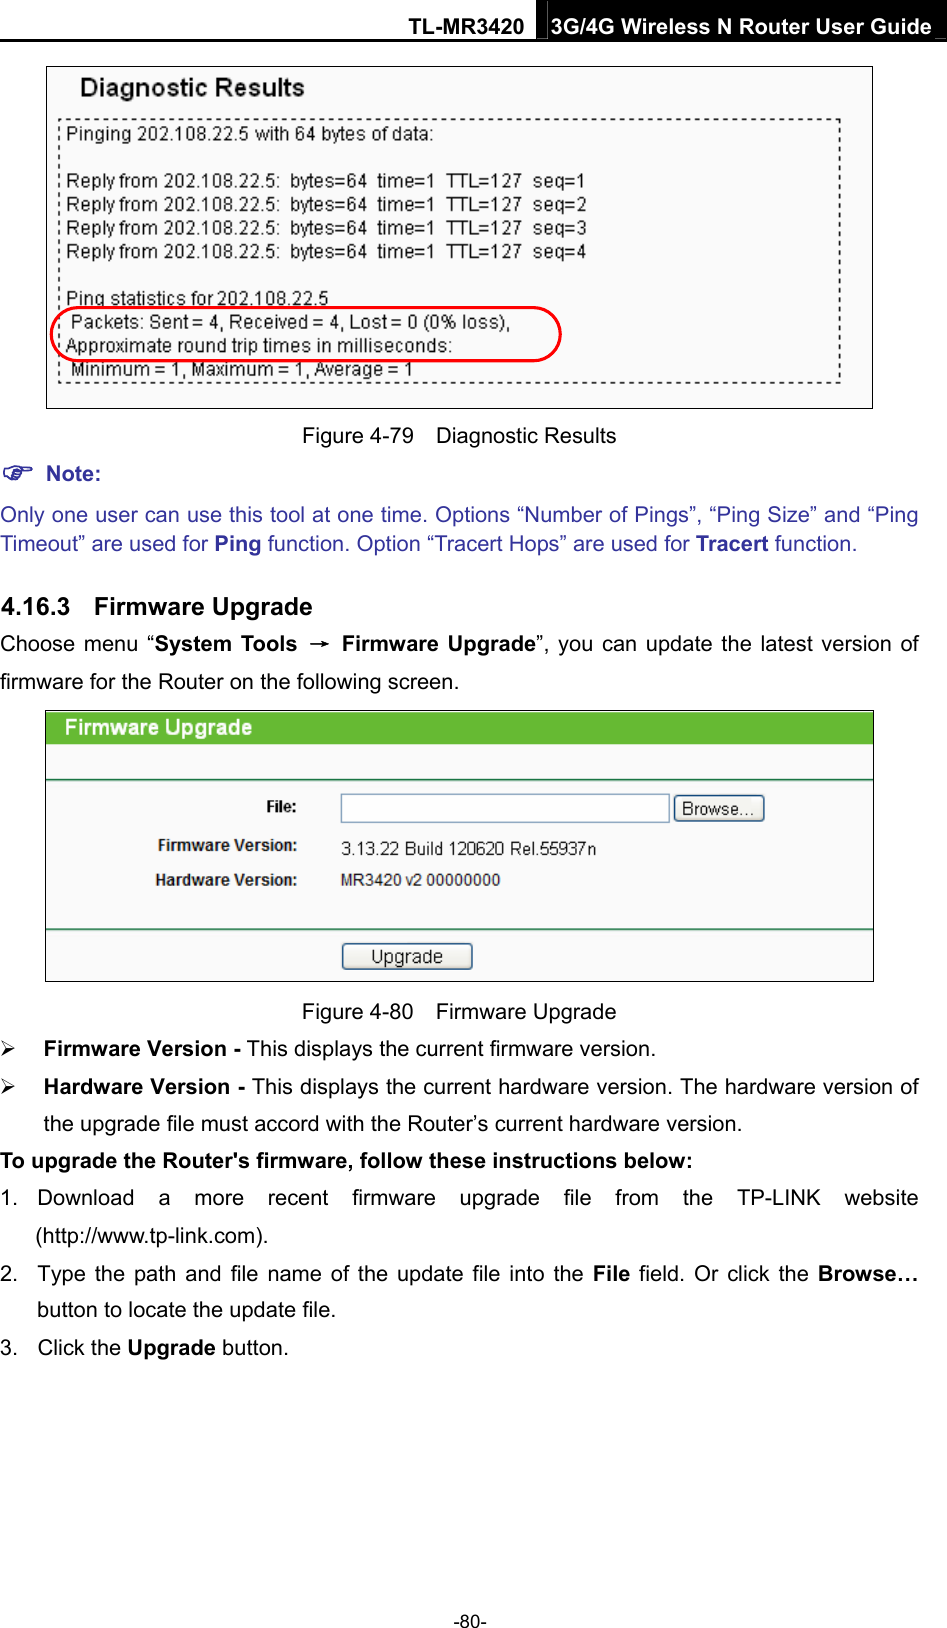 TL-MR3420 3G/4G Wireless N Router User Guide  Figure 4-79  Diagnostic Results  Note: Only one user can use this tool at one time. Options “Number of Pings”, “Ping Size” and “Ping Timeout” are used for Ping function. Option “Tracert Hops” are used for Tracert function. 4.16.3  Firmware Upgrade Choose menu “System Tools → Firmware Upgrade”, you can update the latest version of firmware for the Router on the following screen.  Figure 4-80  Firmware Upgrade  Firmware Version - This displays the current firmware version.  Hardware Version - This displays the current hardware version. The hardware version of the upgrade file must accord with the Router’s current hardware version. To upgrade the Router&apos;s firmware, follow these instructions below: 1. Download a more recent firmware upgrade file from the TP-LINK website (http://www.tp-link.com).  2.  Type the path and file name of the update file into the File field. Or click the Browse… button to locate the update file. 3. Click the Upgrade button. -80- 